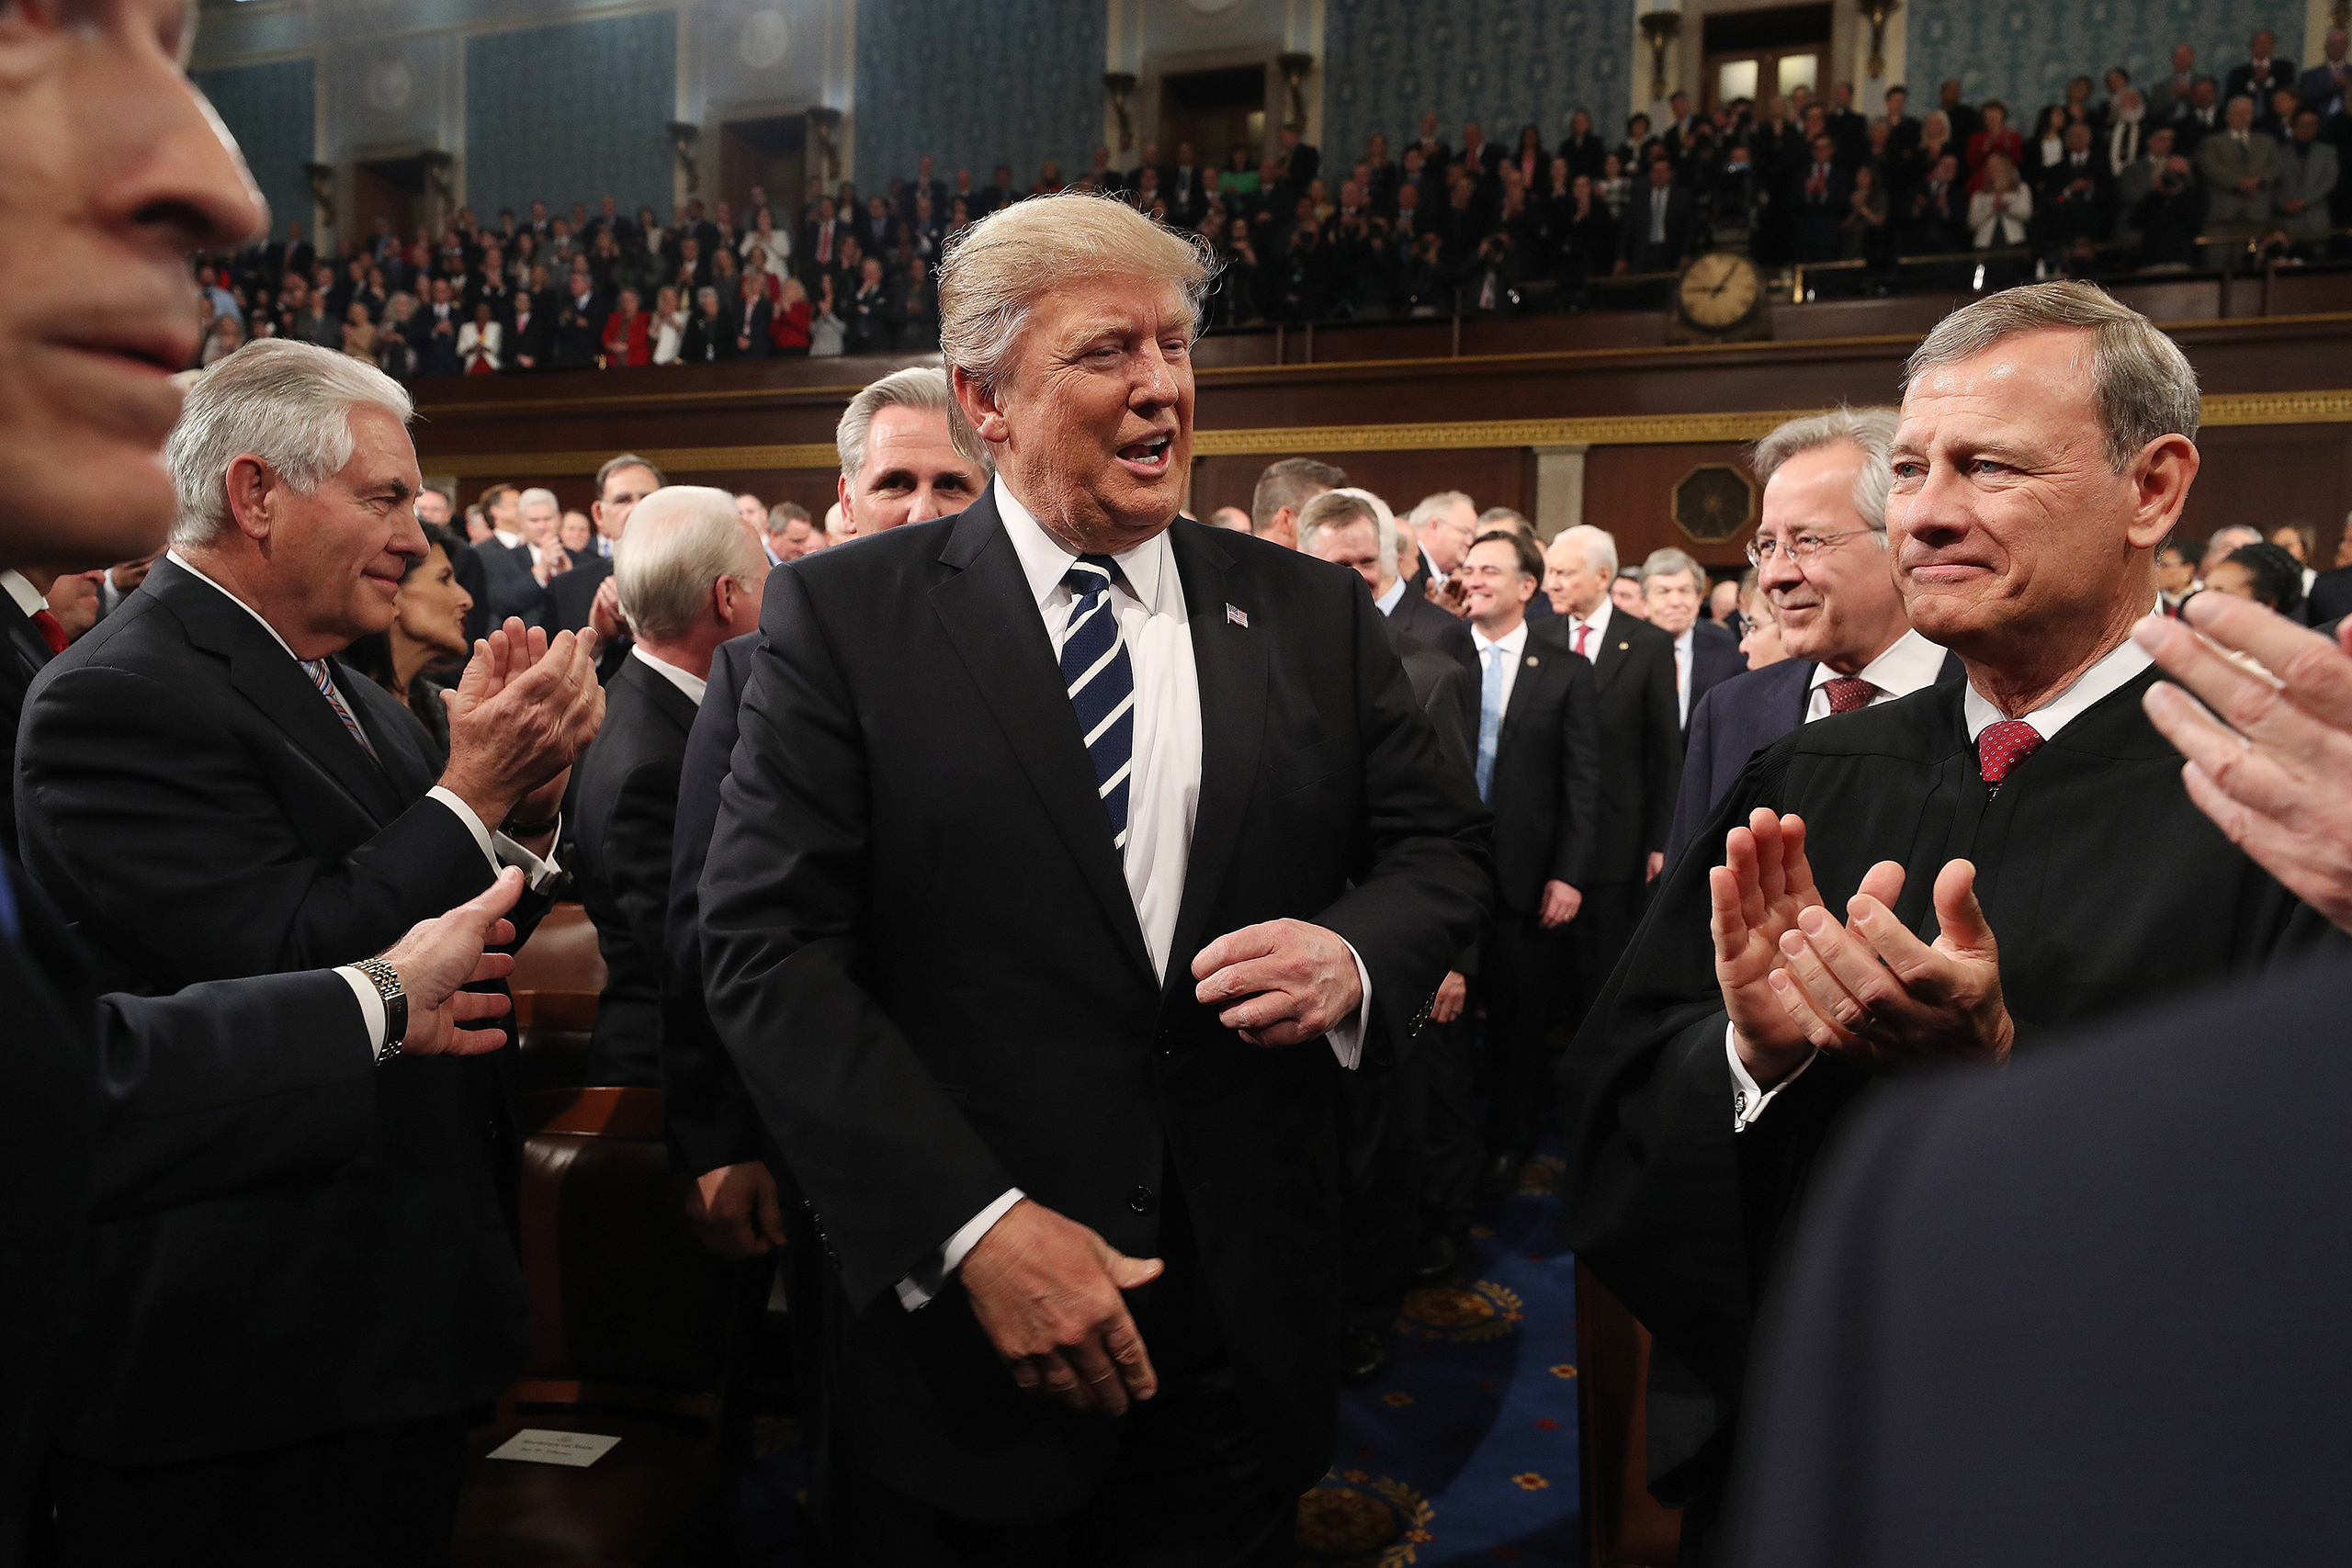 Trump arrives in the House of Representatives Feb. 28 to deliver his speech to a joint session of Congress. (Jim Lo Scalzo—Redux)